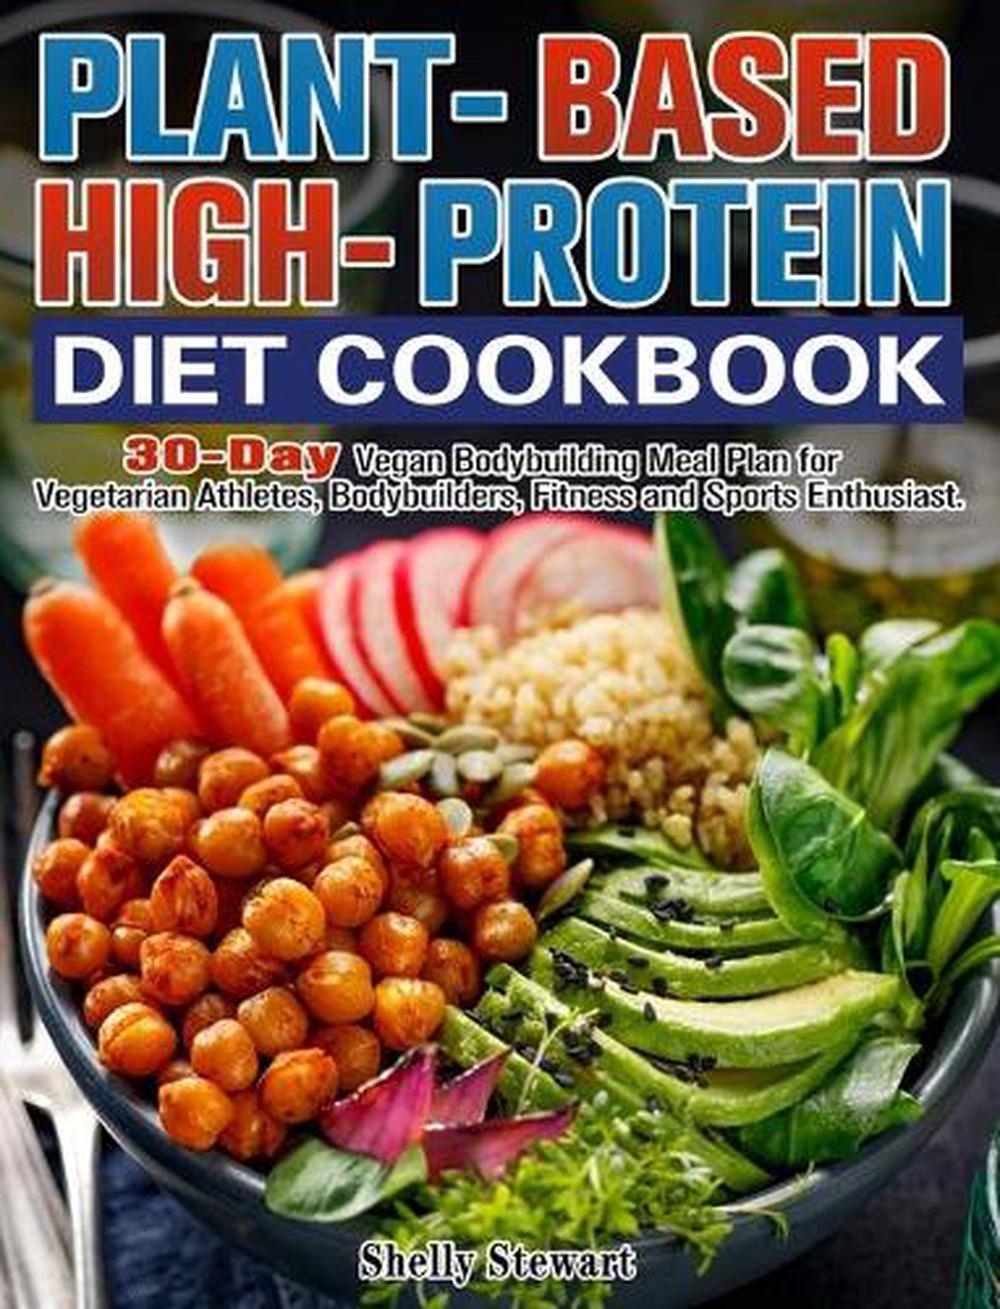 Plant-based High-protein Diet Cookbook by Shelly Stewart Hardcover Book ...